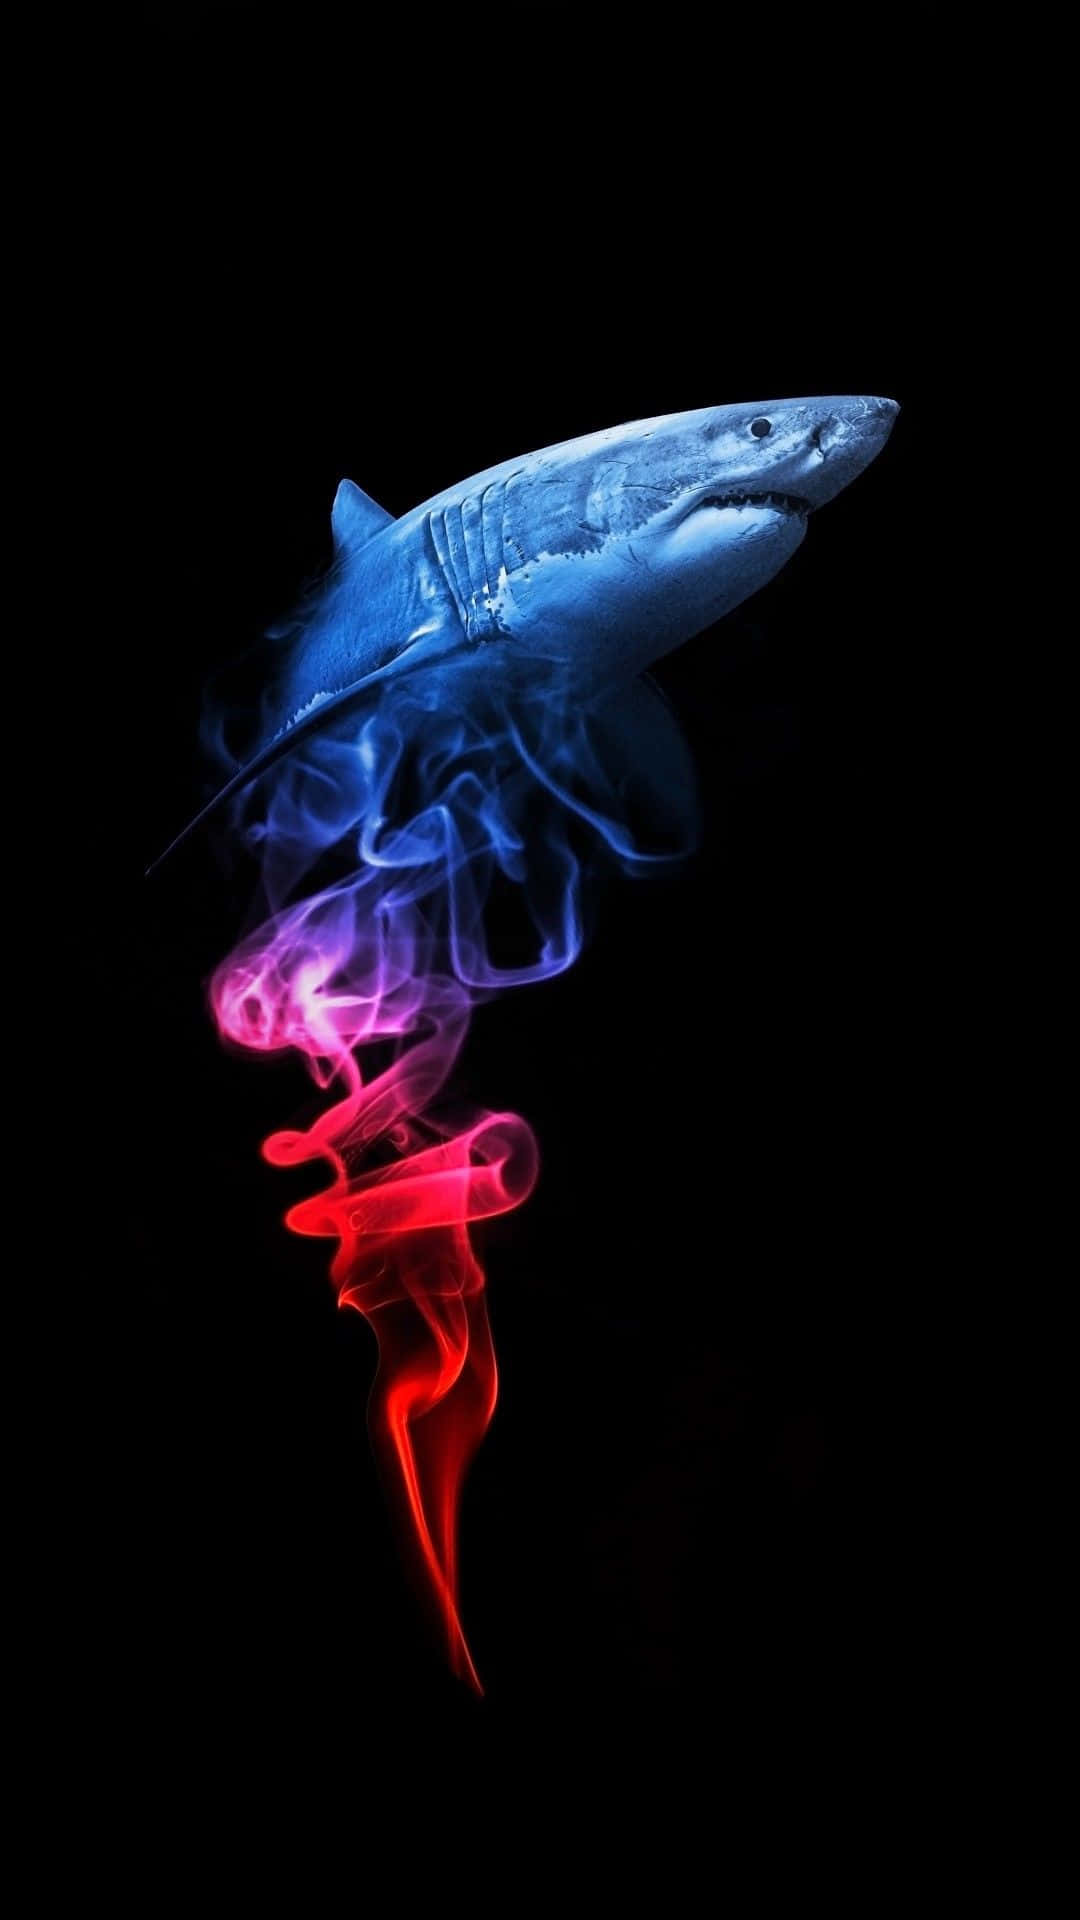 A Shark Is Flying In The Air With Smoke